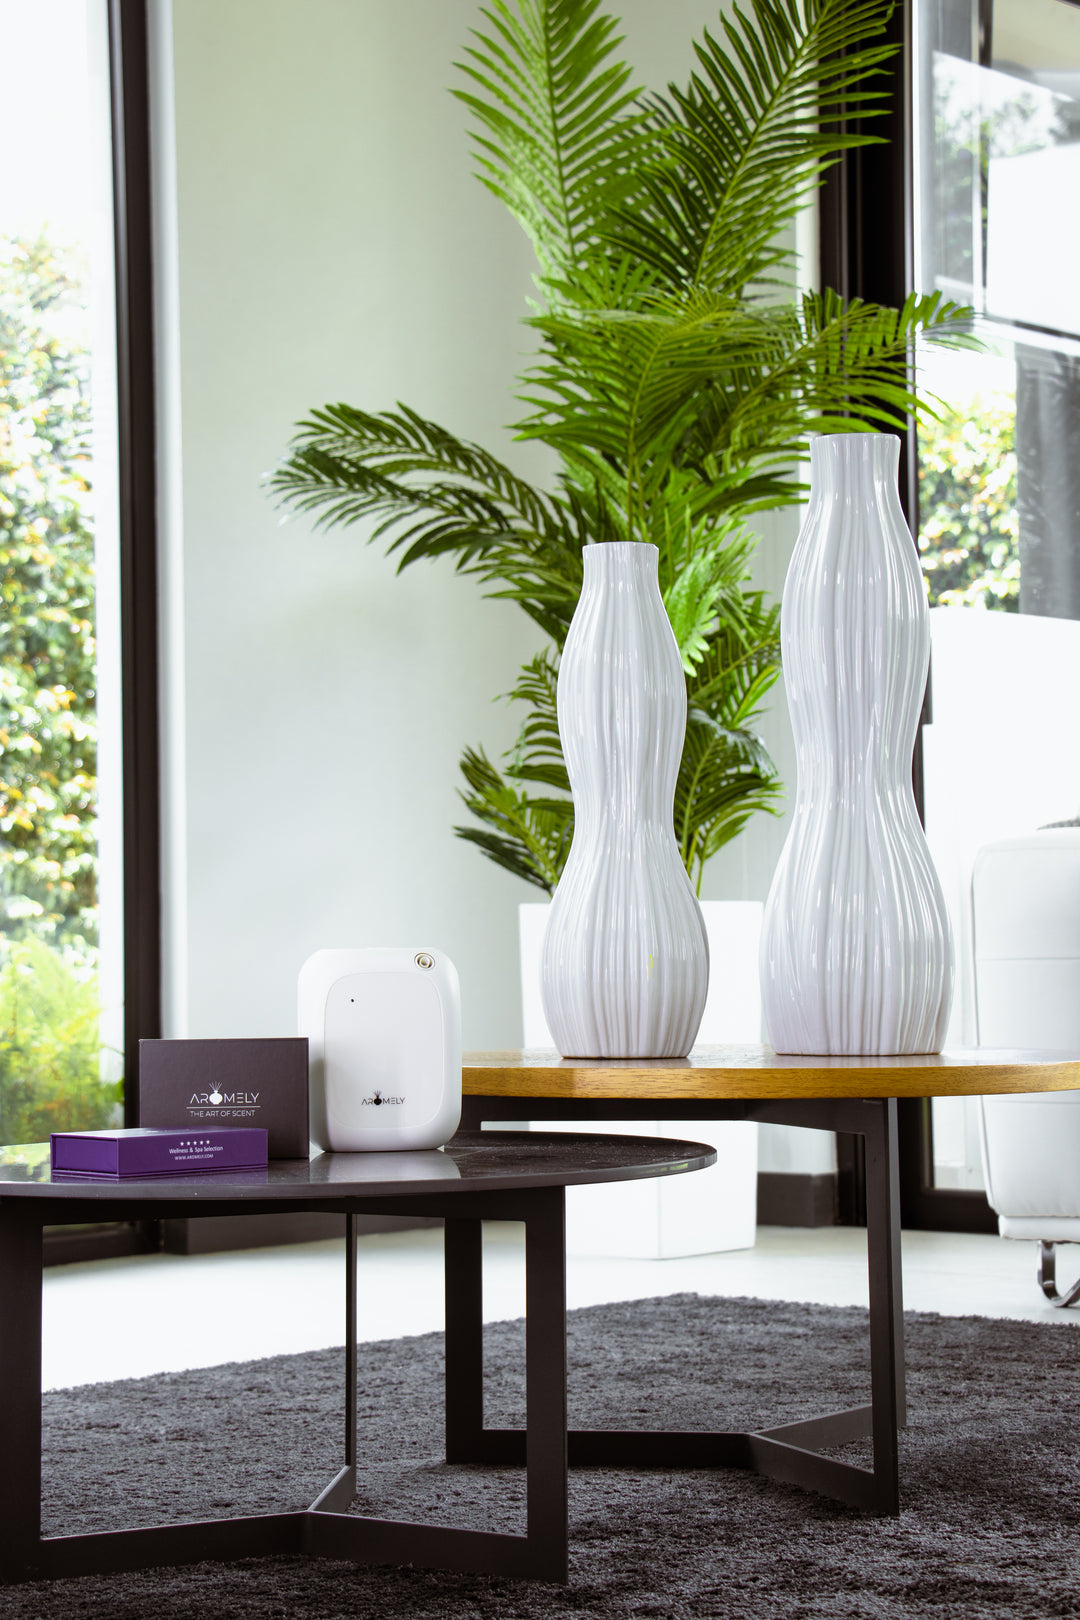 A modern and minimalist living room featuring an Aromely ARO-25-MAX white scent diffuser on a wooden console table. The diffuser is placed next to sleek white vases and a lush green potted plant, with a large window providing natural light.